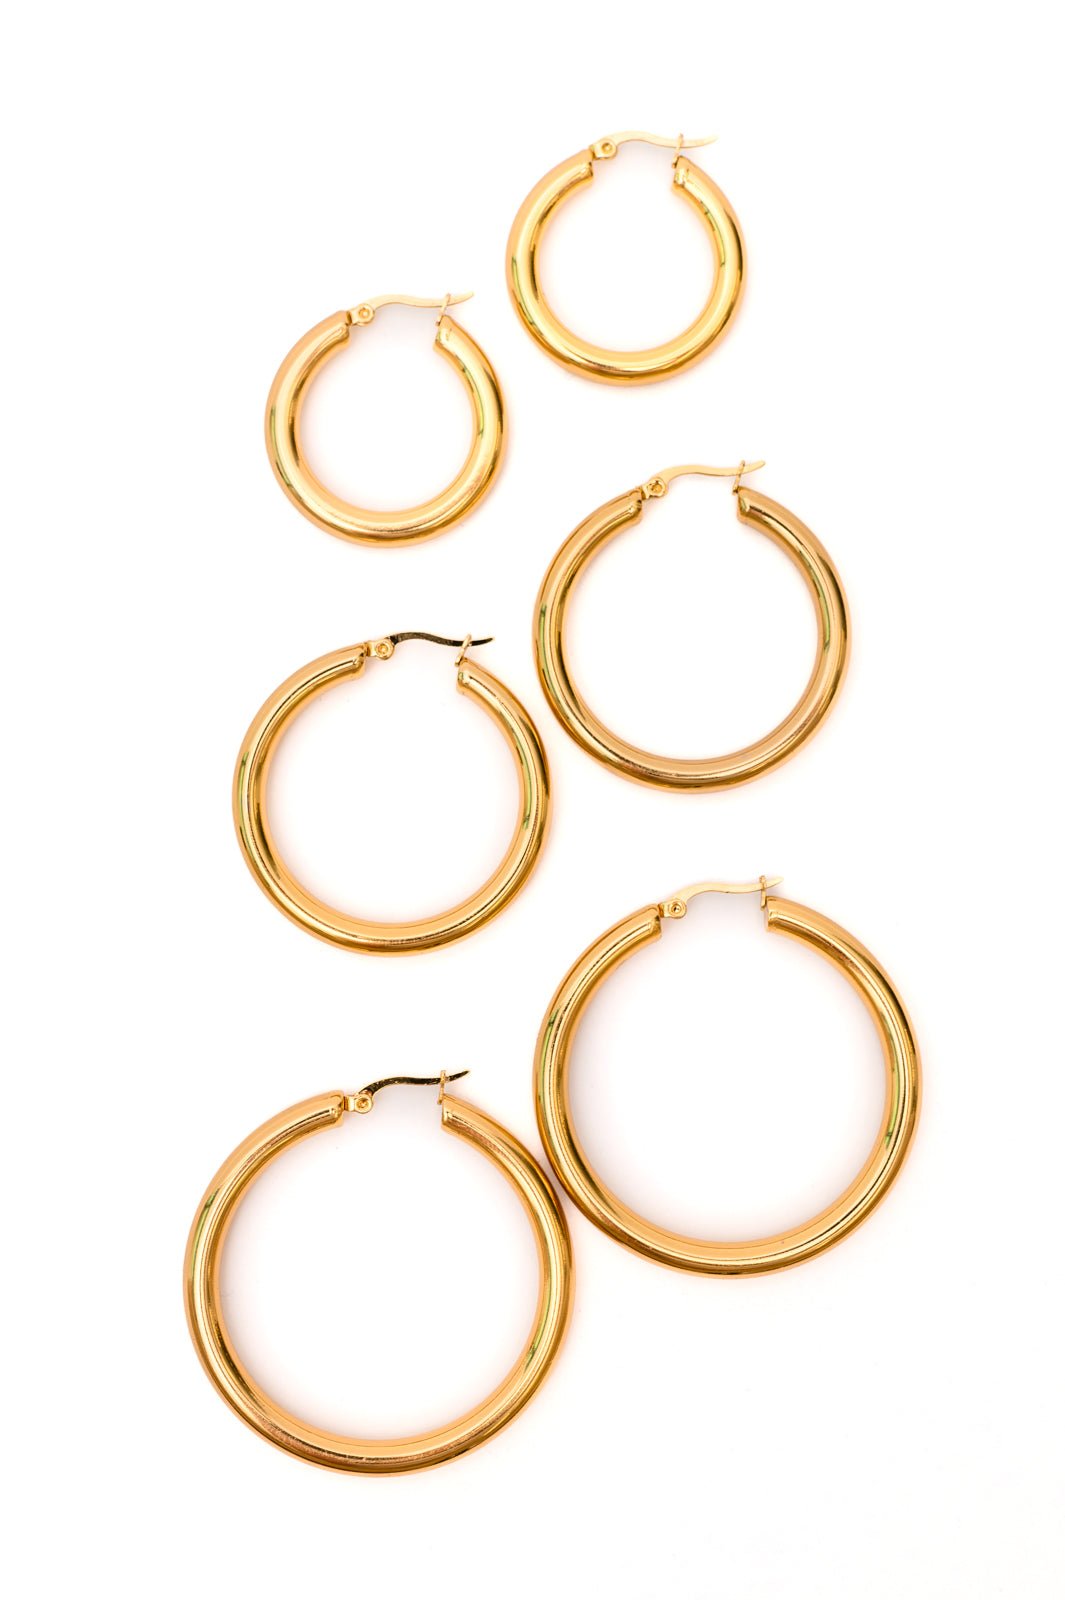 Day to Day Hoop Earrings Set in Gold - Happily Ever Atchison Shop Co.